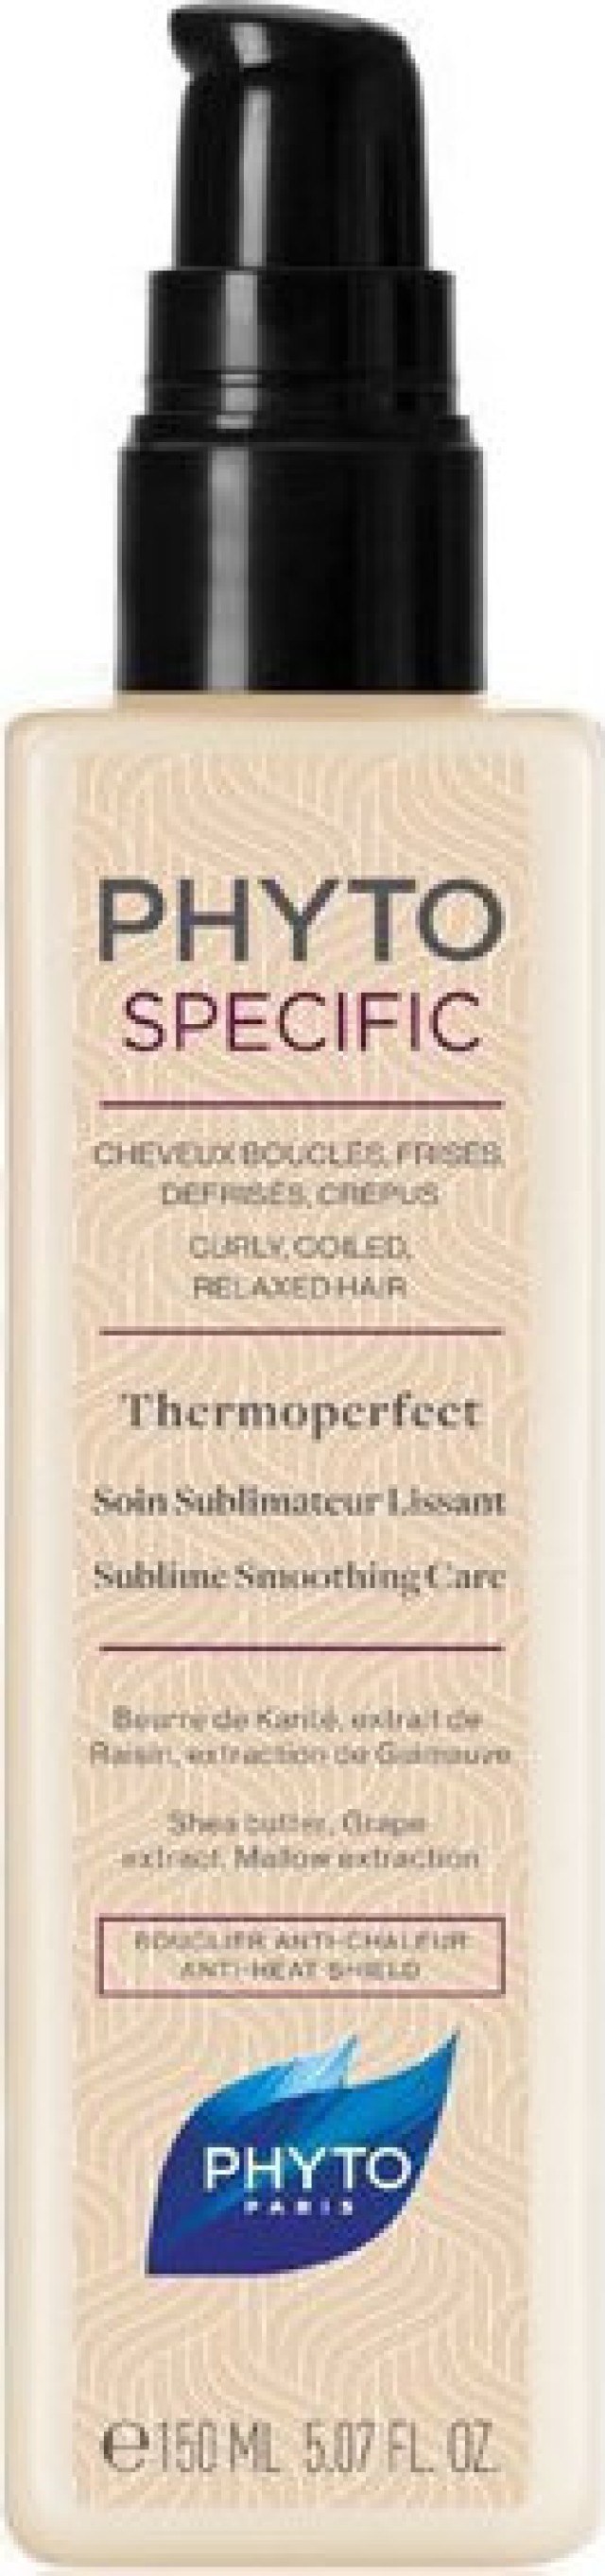 Phyto - Specific Thermoperfect Sublime Smoothing Care 150ml